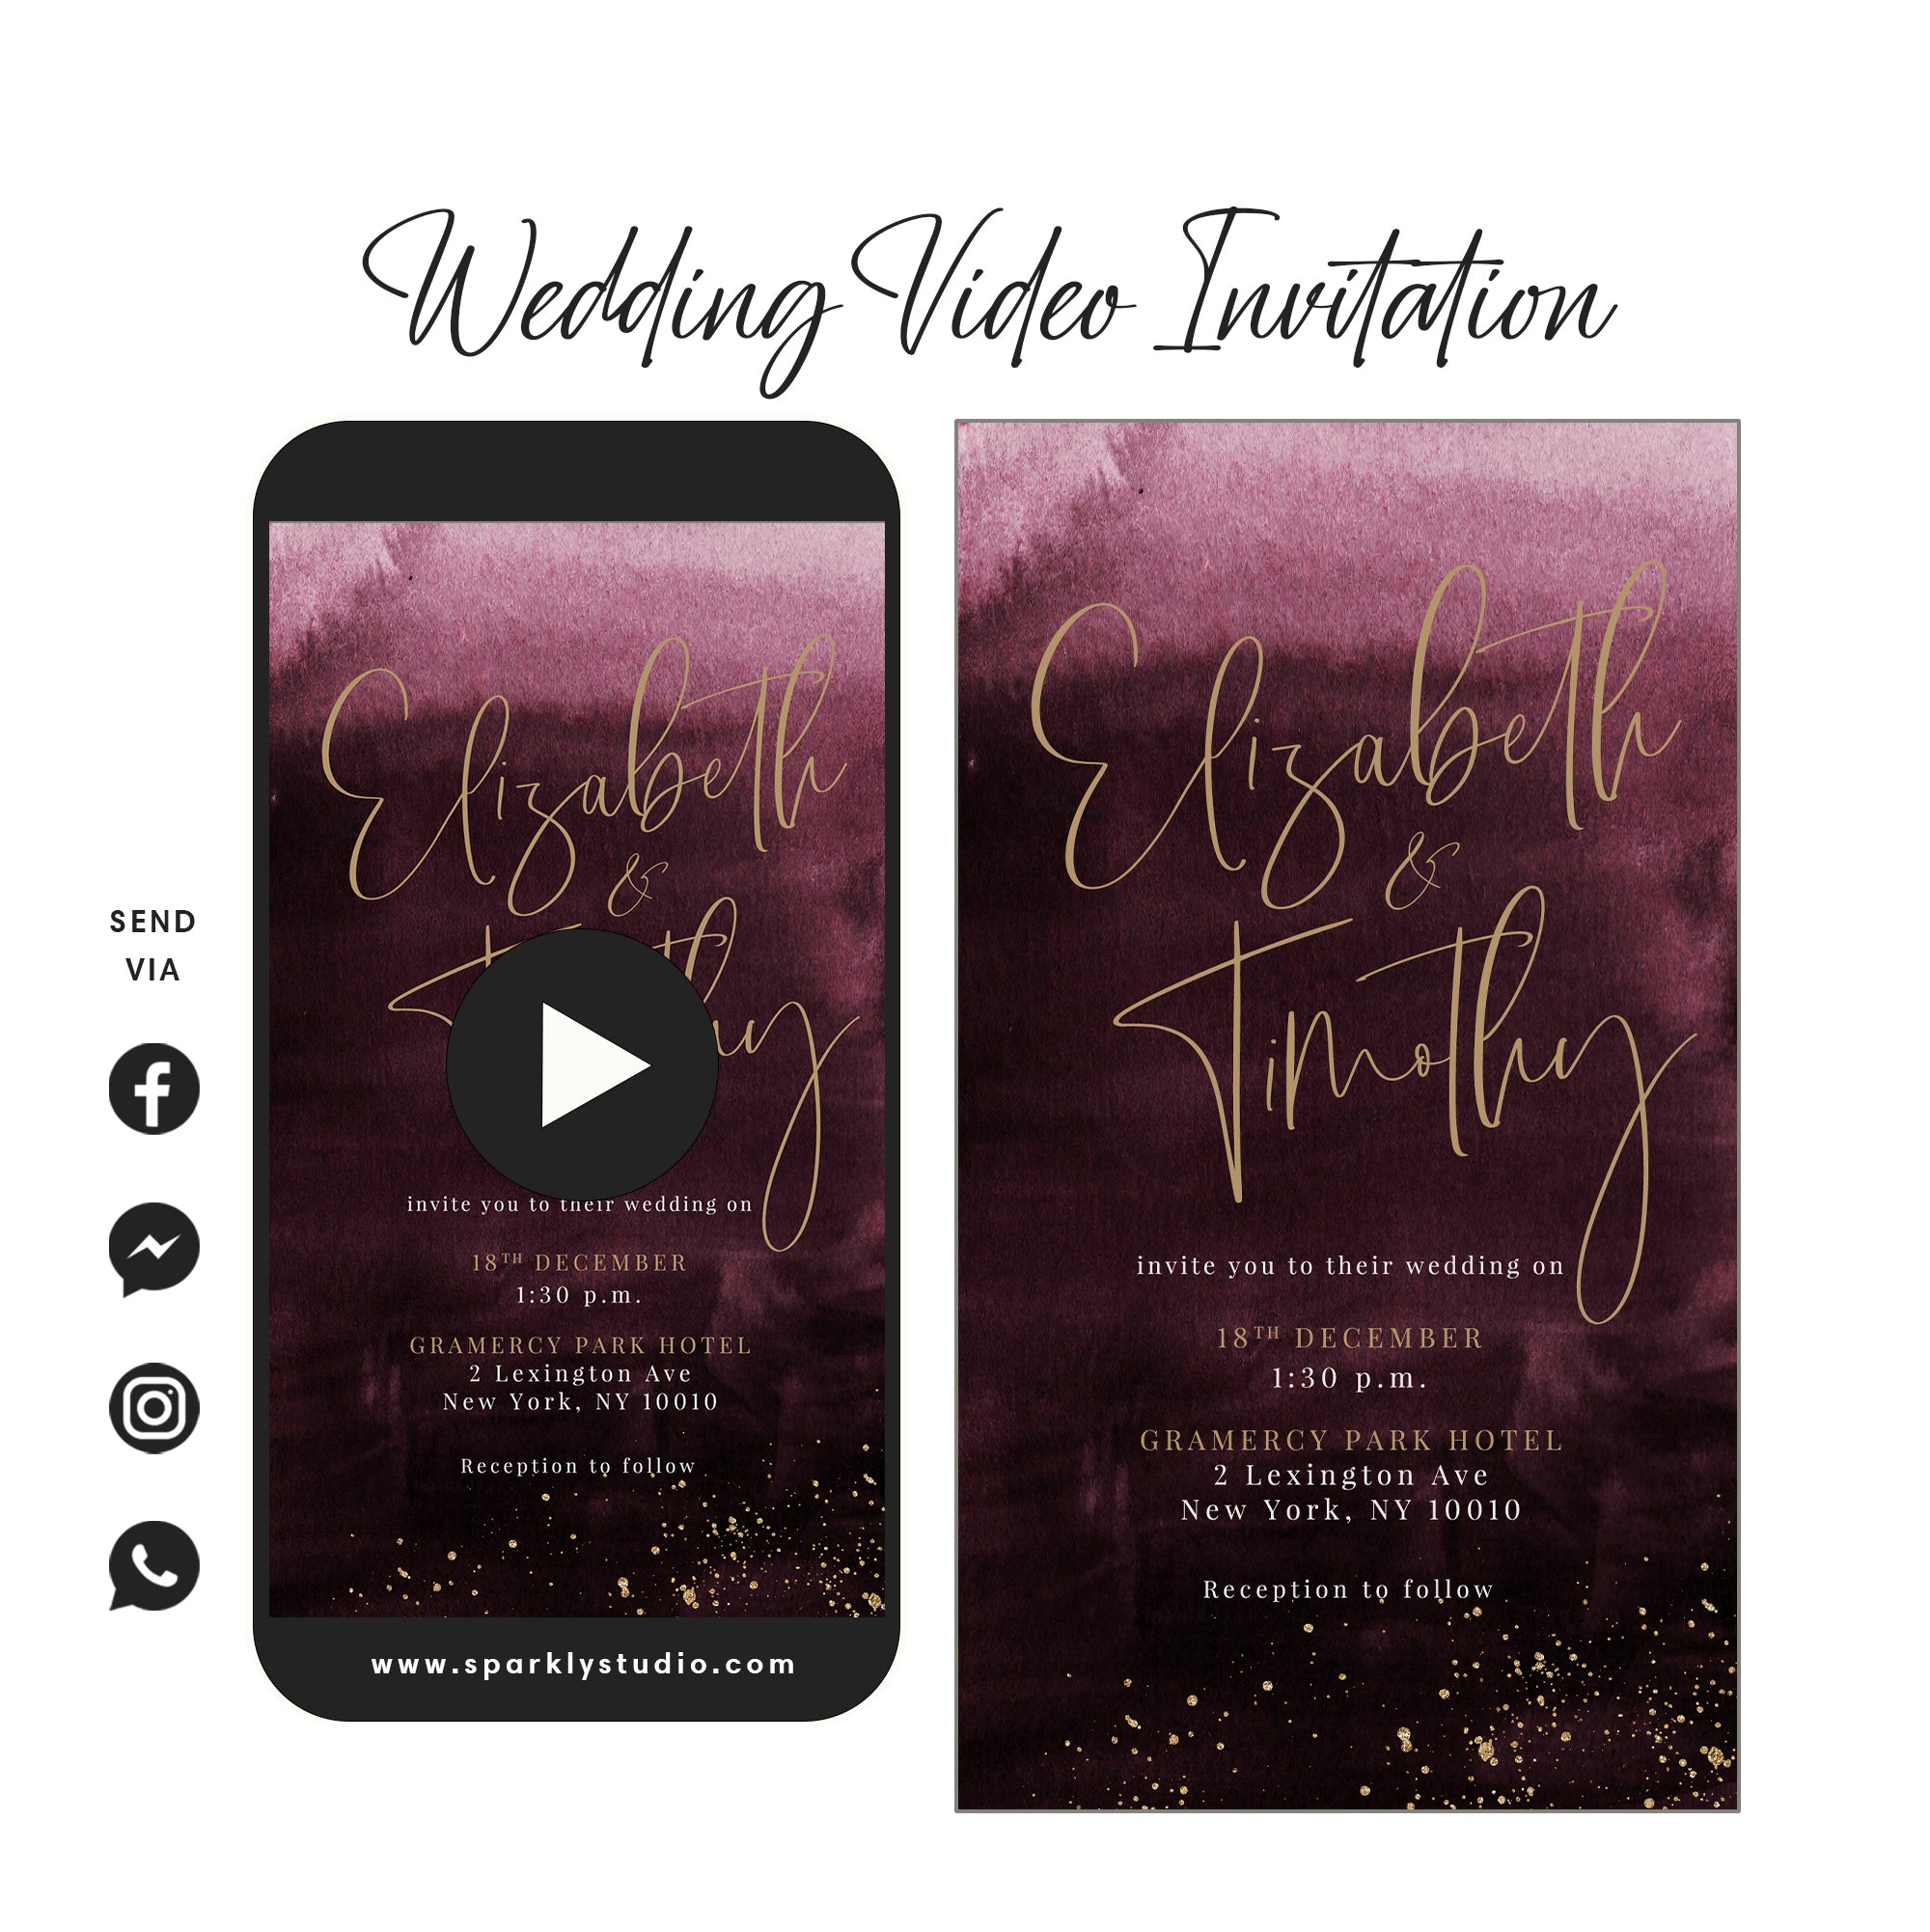 Burgundy Red - Wedding Video Invitation - Save The Date Video